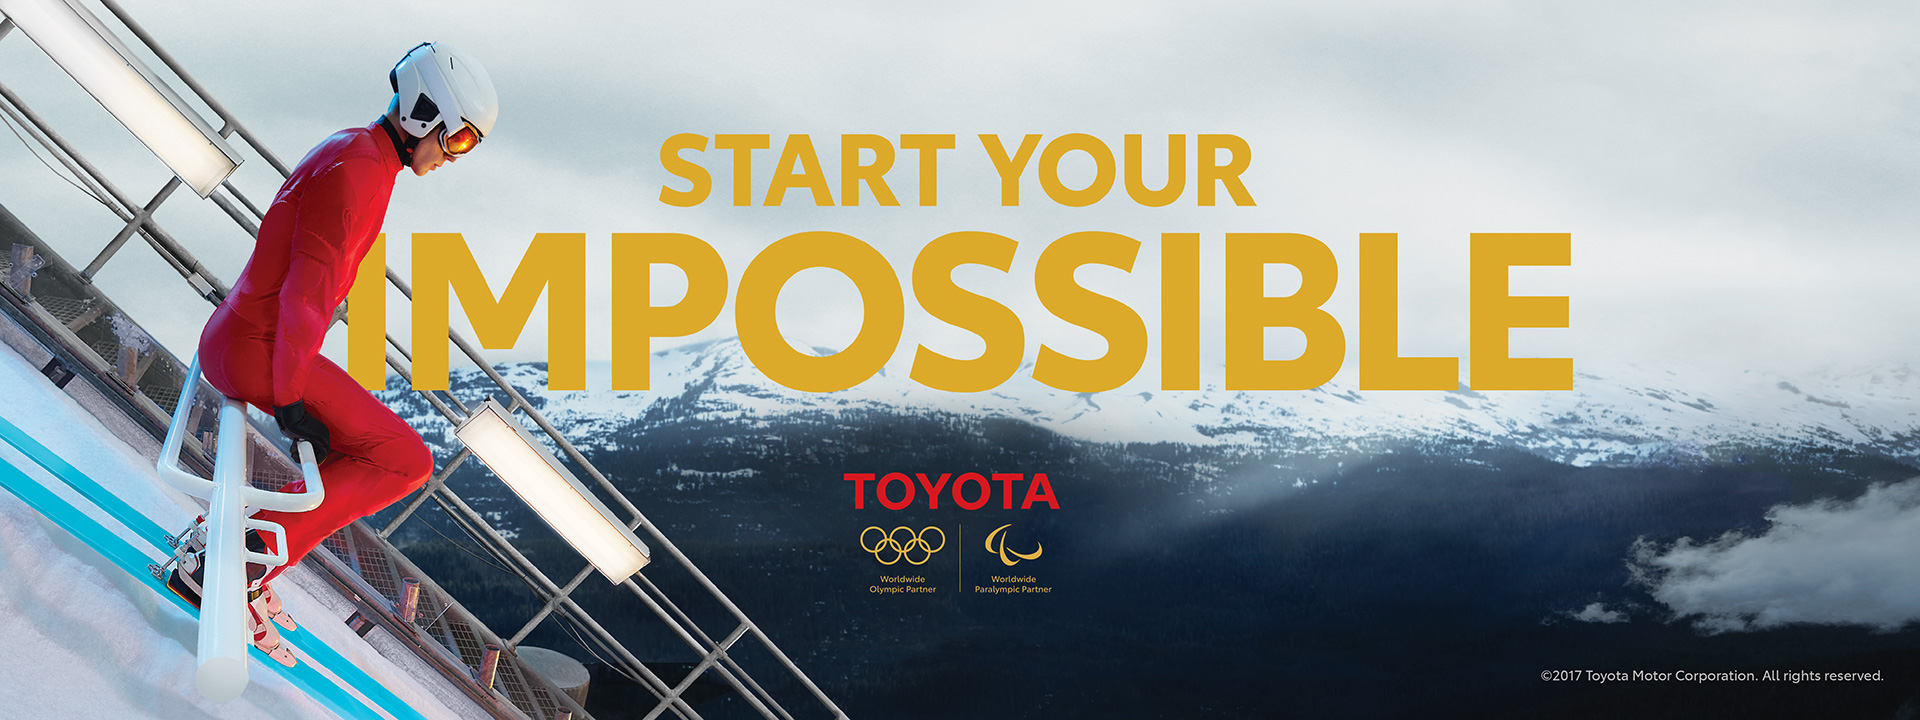 Toyota Rolls Out 'Start Your Impossible' Global Campaign that Reflects the Olympic and Paralympic Spirit of Encouragement, Challenge and Progress